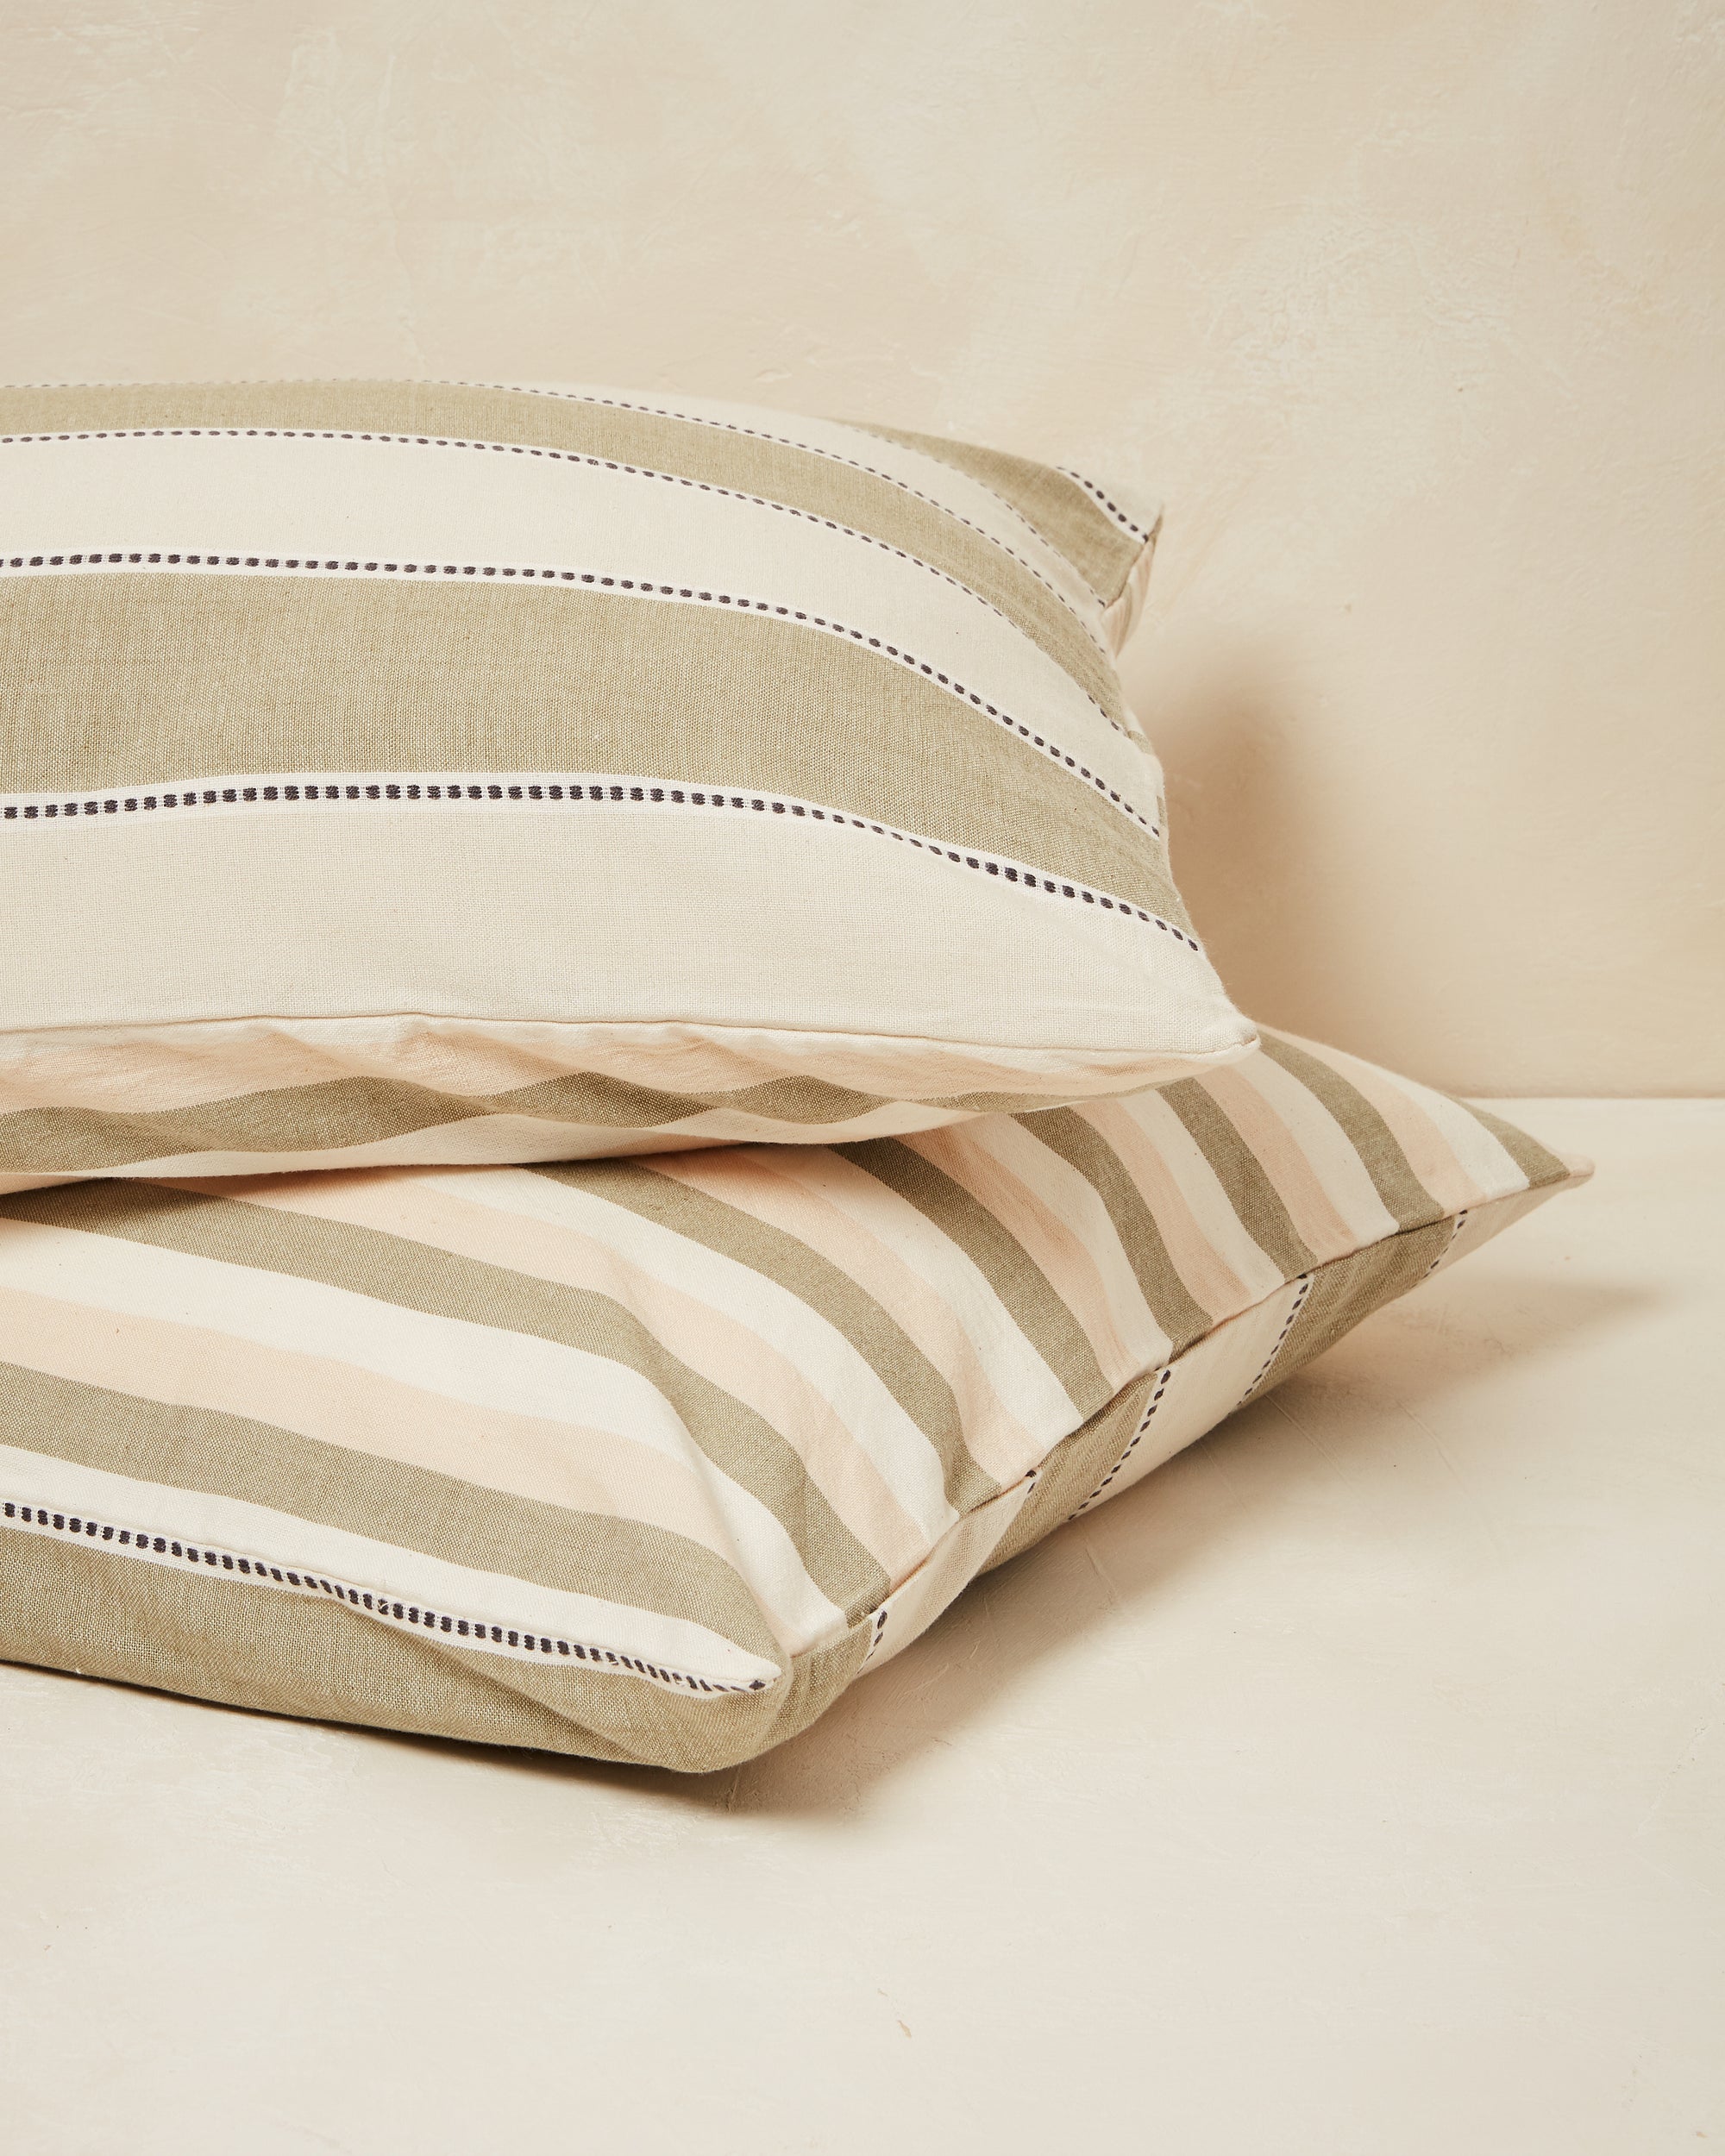 Ethically handwoven oeko-tex certified cotton MINNA pillowcases, cream and sage green stripes